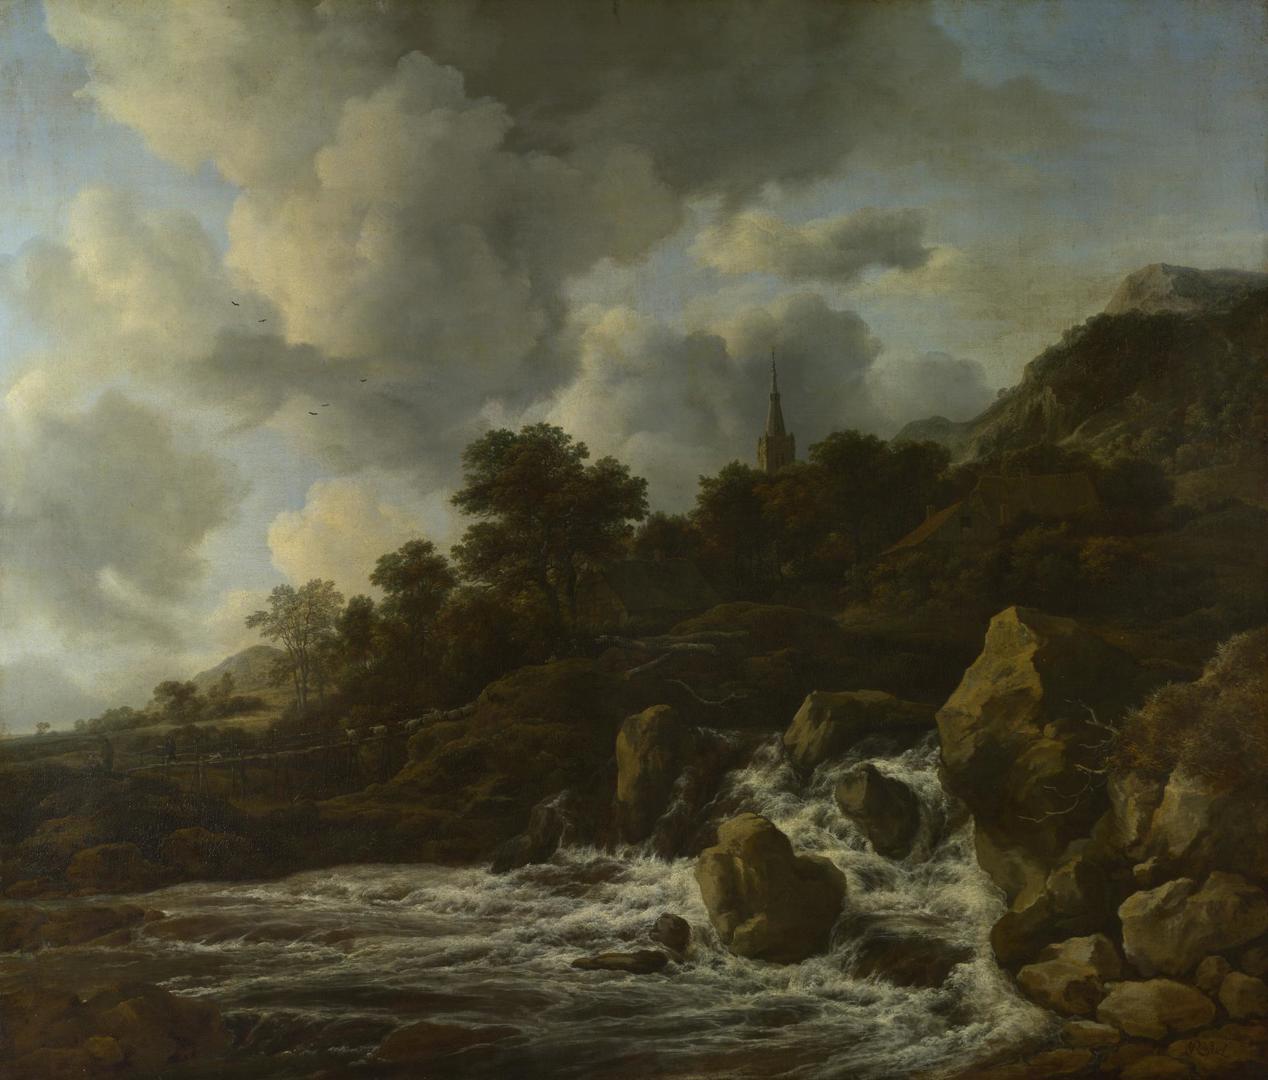 A Waterfall at the Foot of a Hill, near a Village by Jacob van Ruisdael